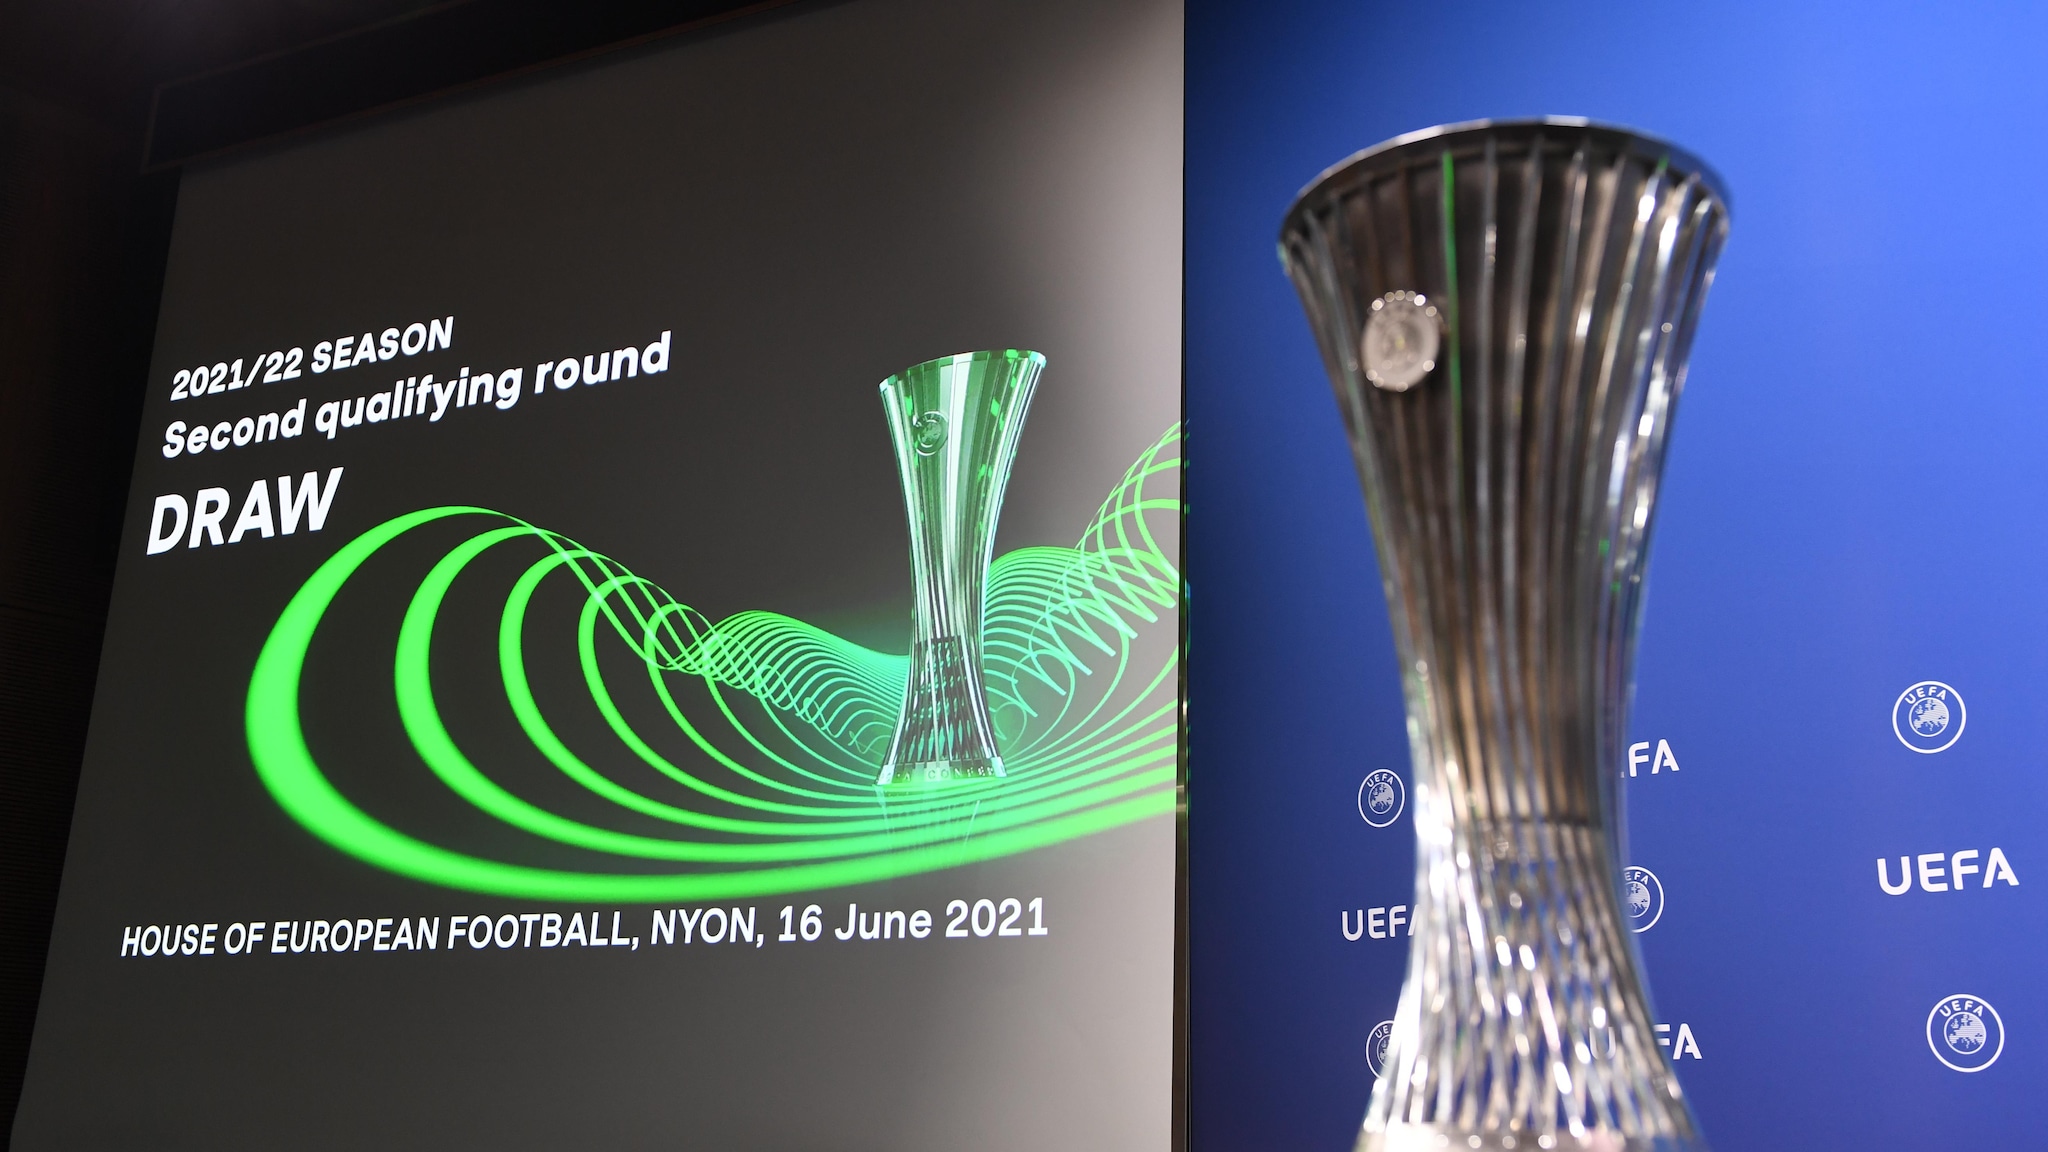 UEFA Europa Conference League second qualifying round draw | UEFA